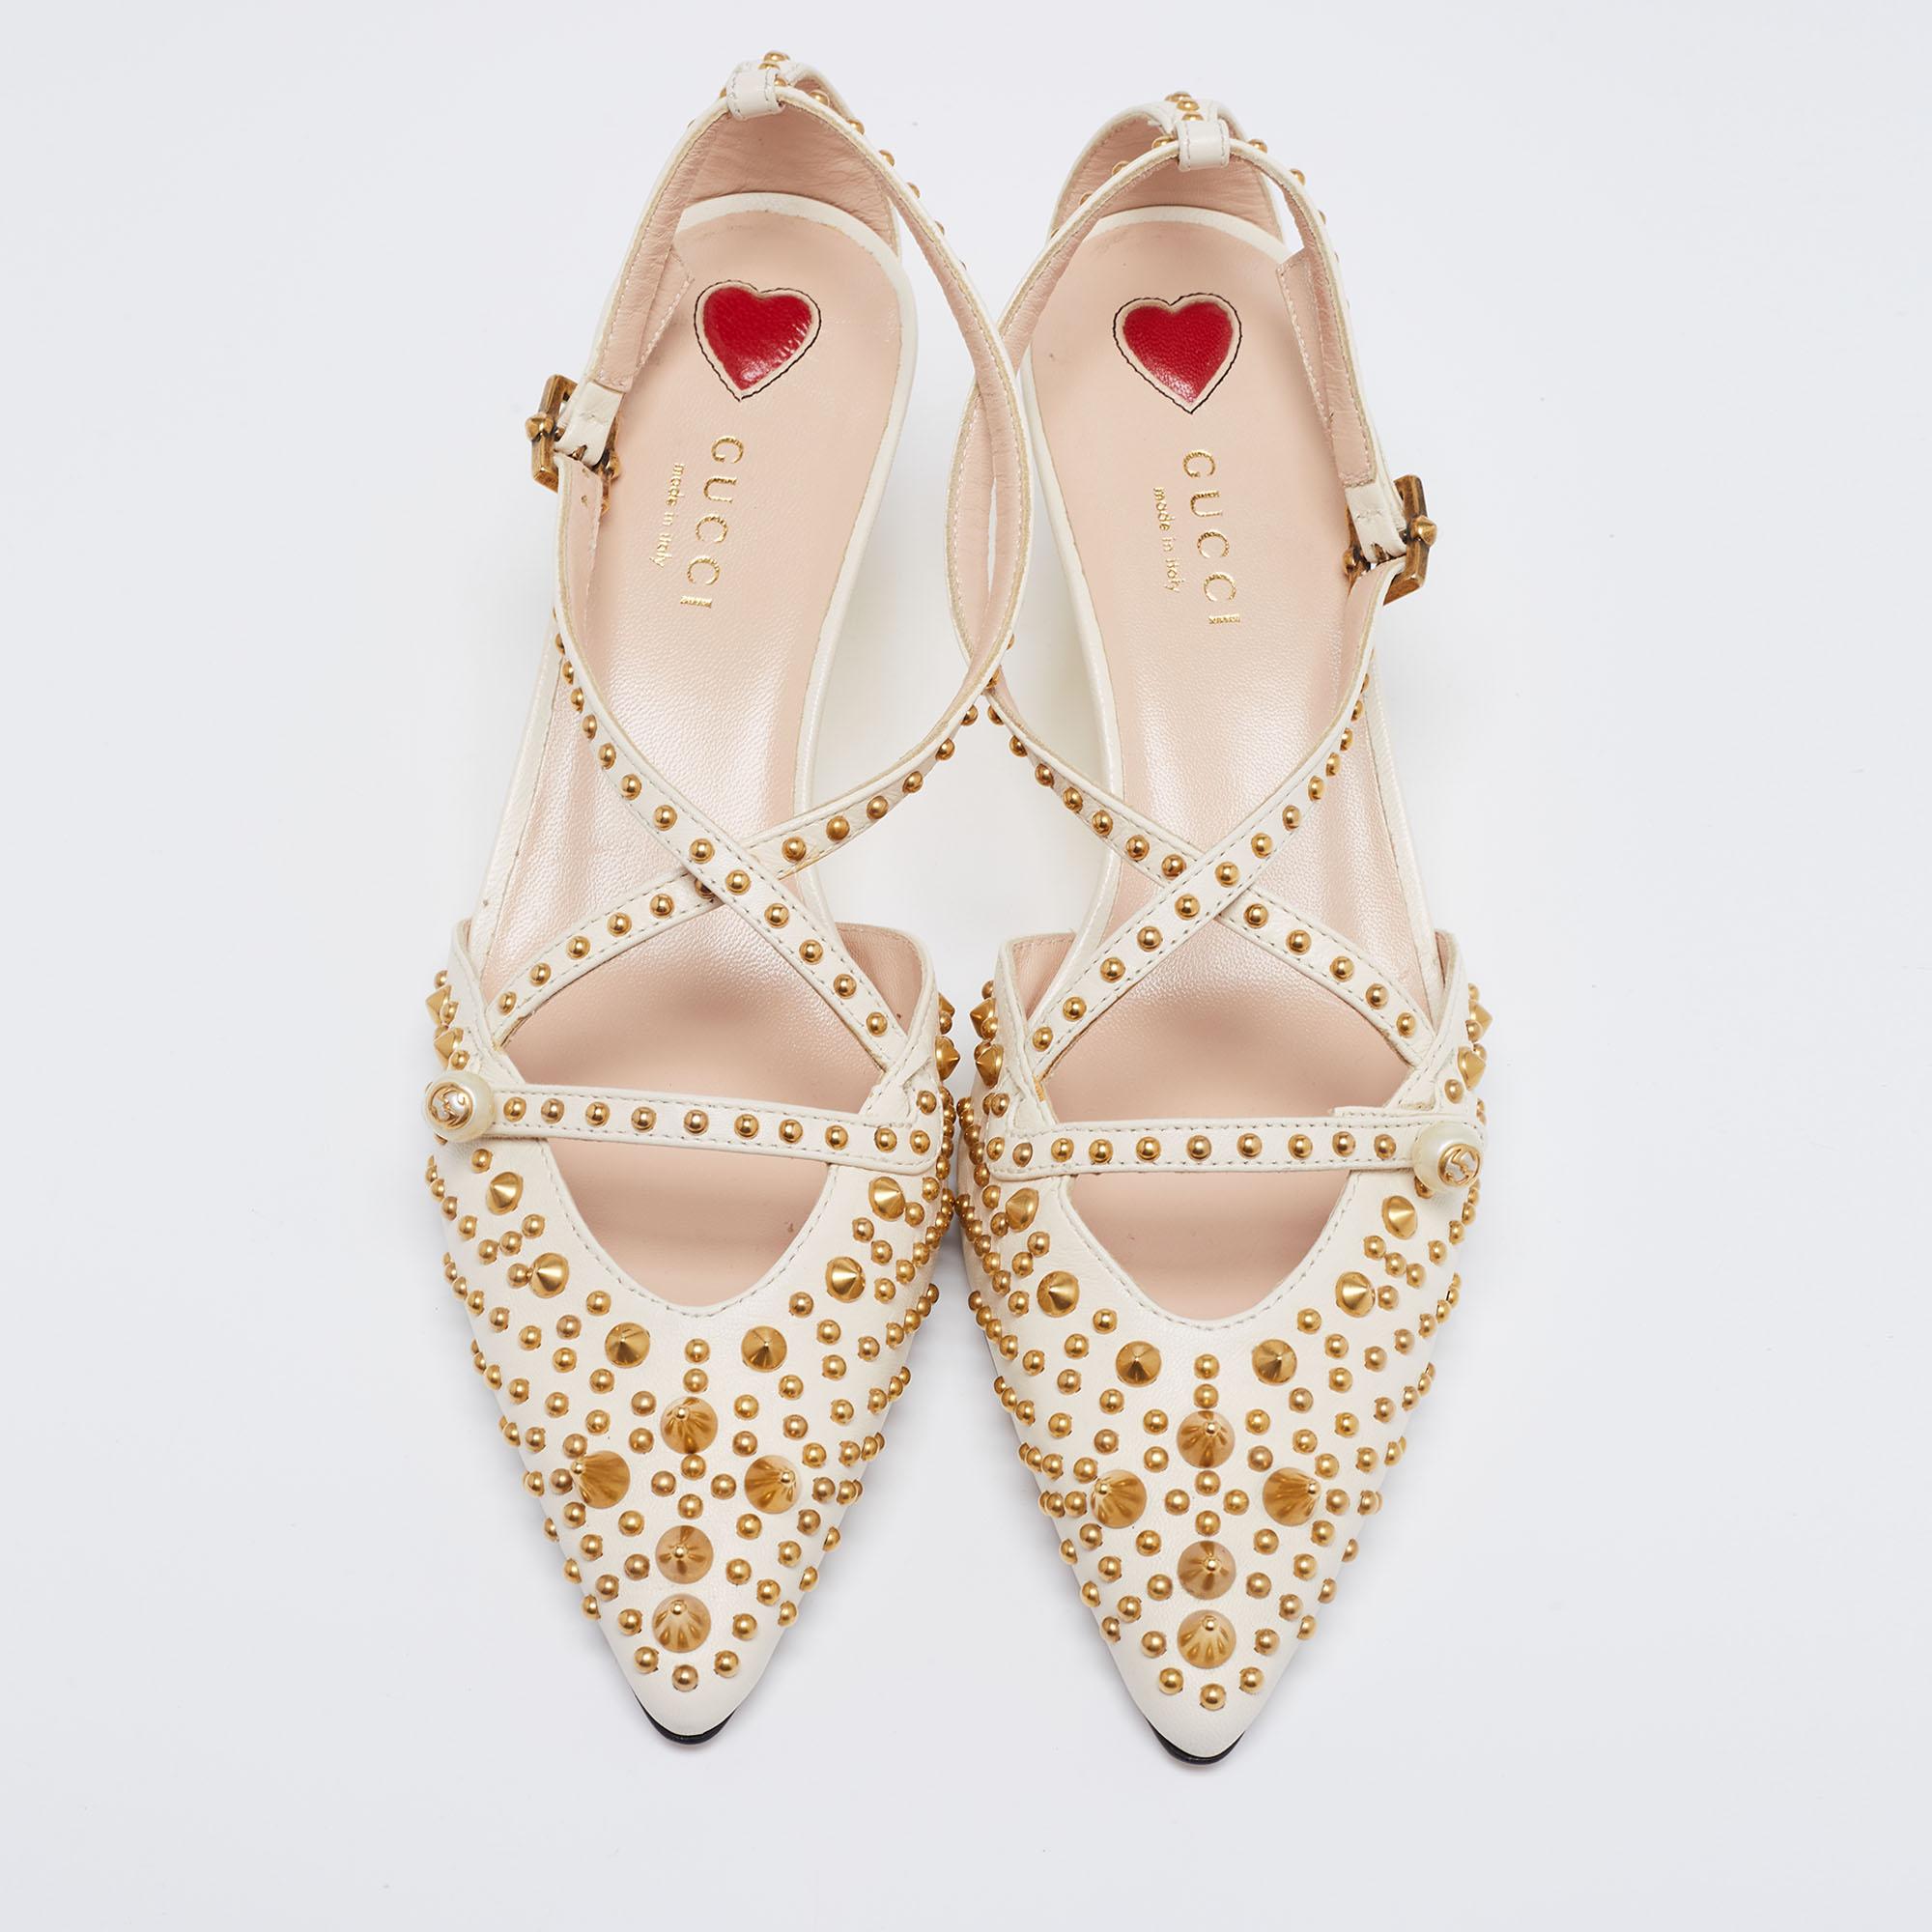 This pair of pointed-toe pumps from Gucci have come straight from a shoe lover's dream. Crafted from white leather, it is detailed with beautiful studs and is balanced on 4.5 cm bamboo heels.

